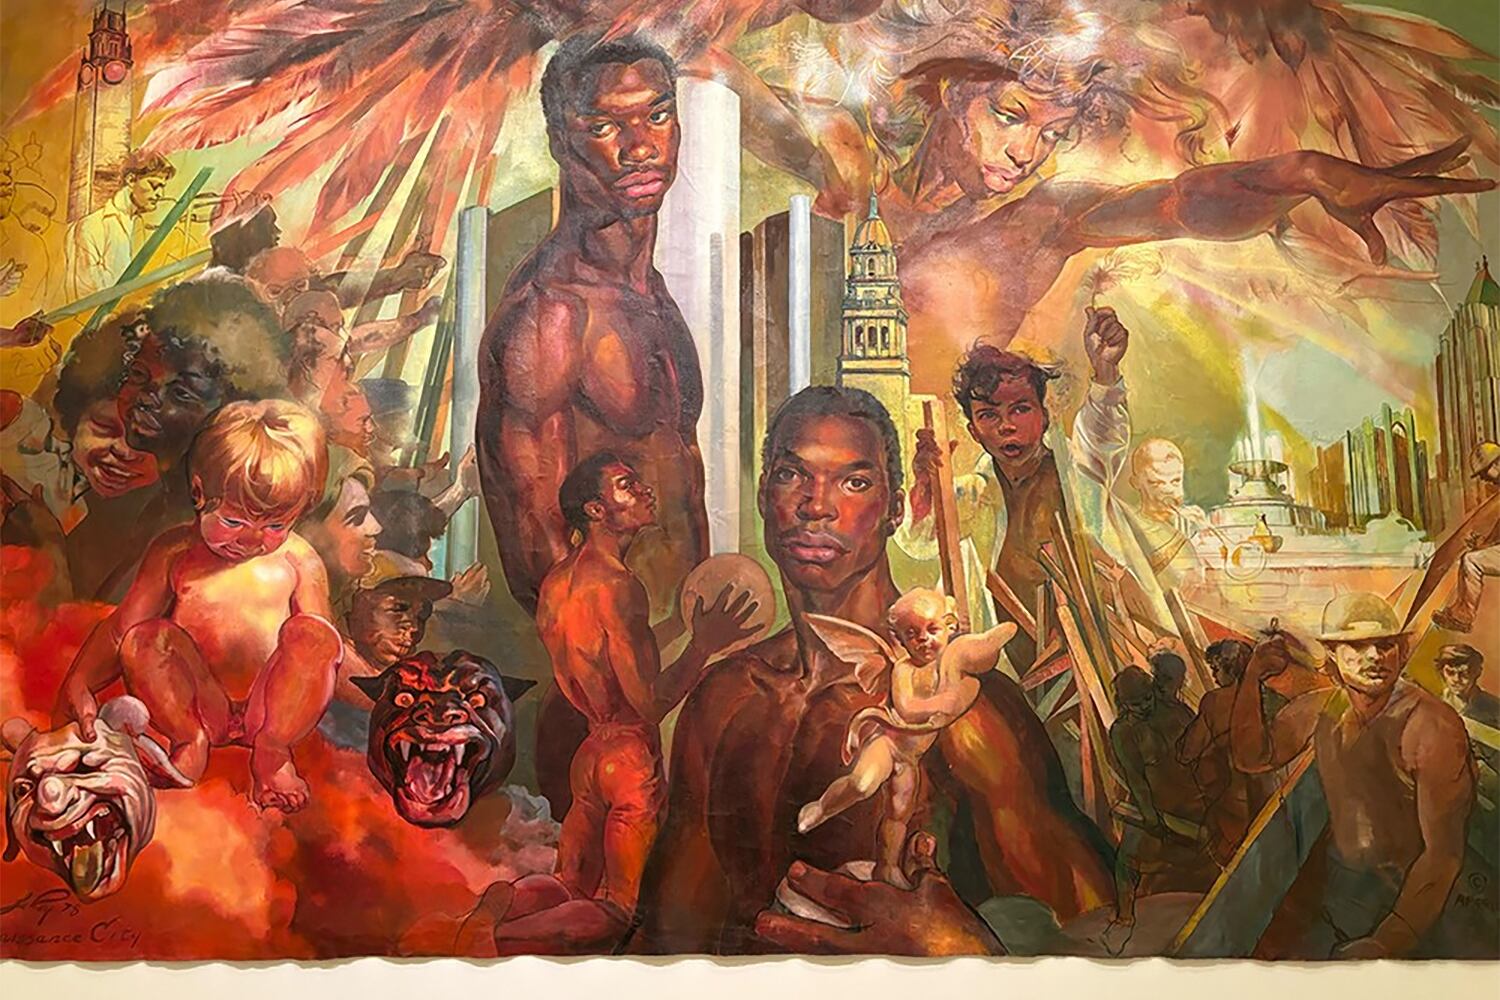 LeRoy Foster's painting showing multiple Black men and other people with Detroit buildings and feathers in the background.